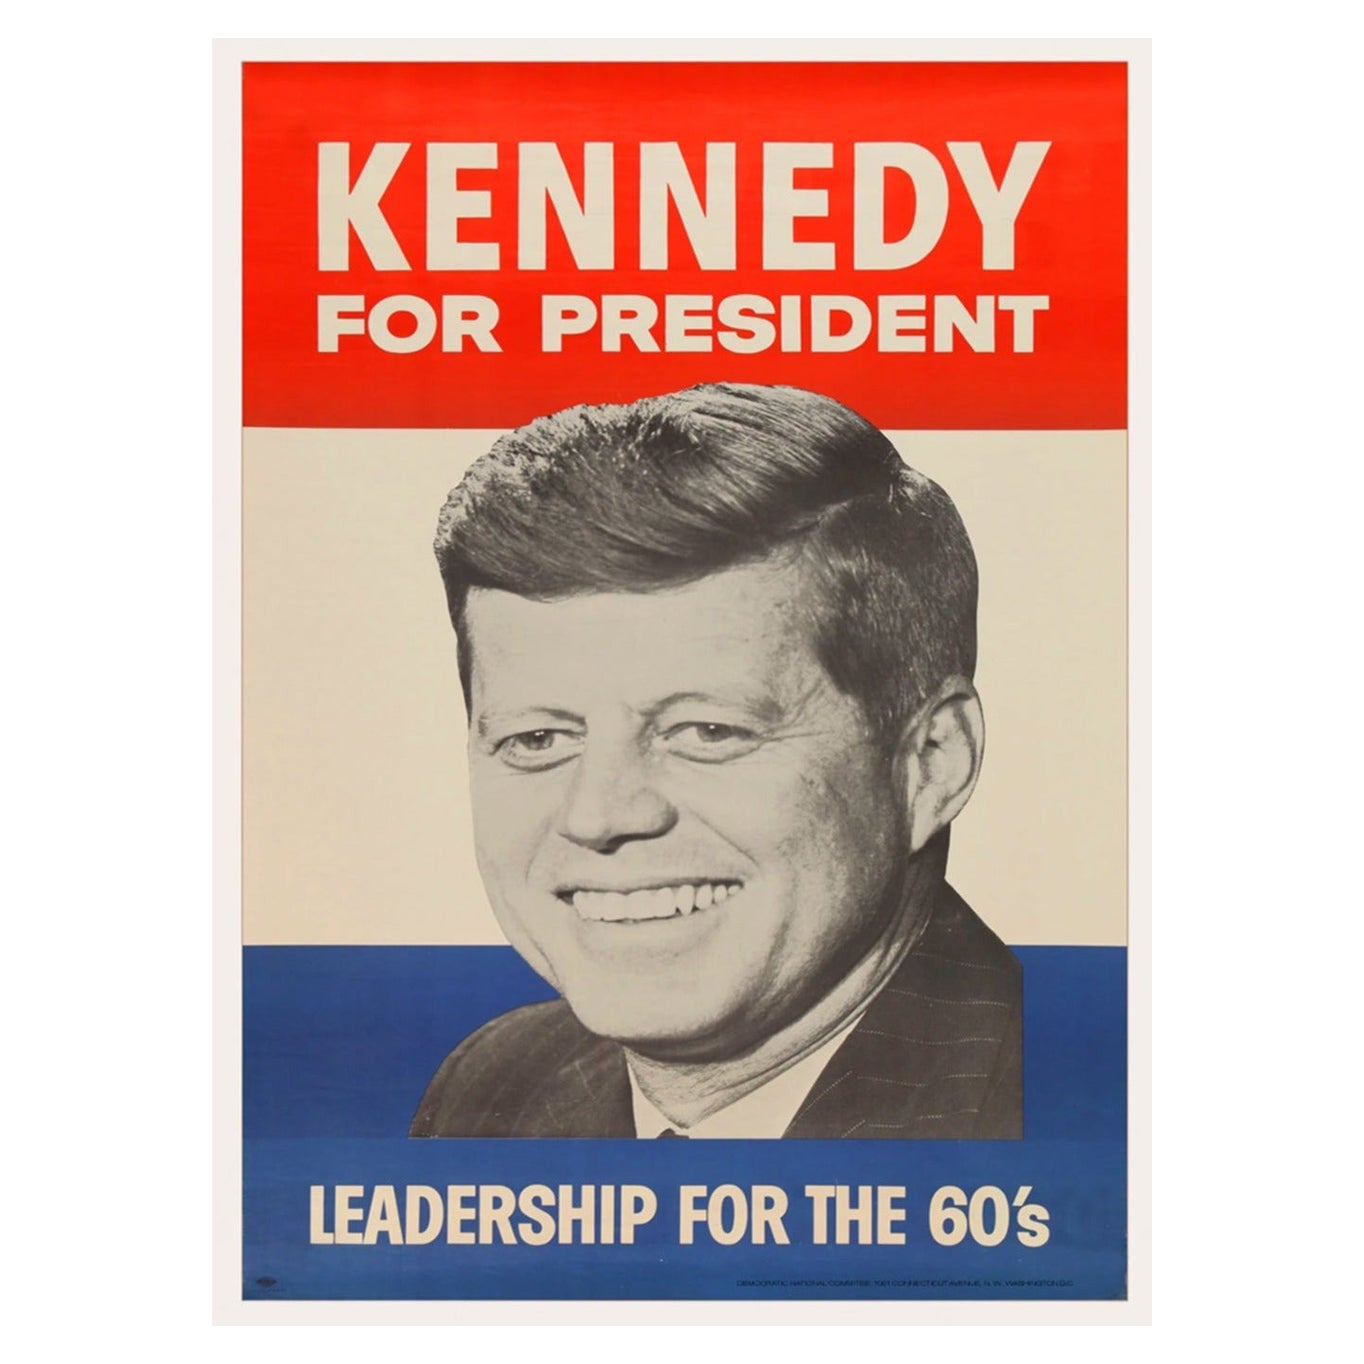 1960 Kennedy for President - Leadership for the 60's Original Vintage Poster For Sale